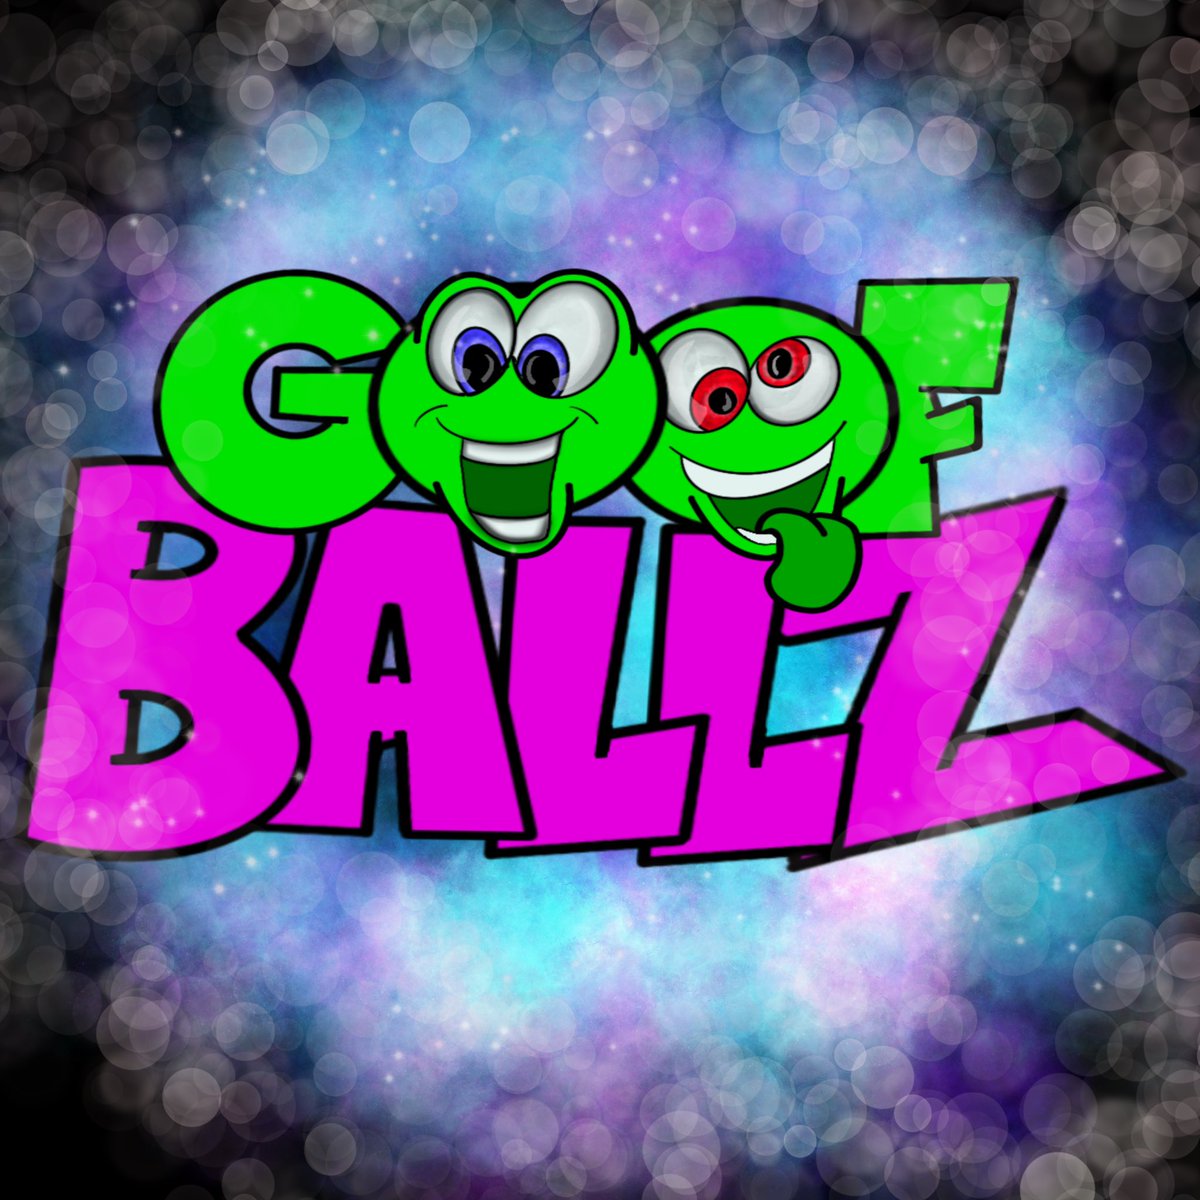 Start out today with our next Twitchy Tides community partner! This one should be no surprise! Lol
#GoofBallzNFT!  🤪

Check them out! ⬇️
t.me/goofballznft

#NFTCollection #NFTS 
#WAXNFT #WAXFAM 
#AstroGoofz #NerdsUnite